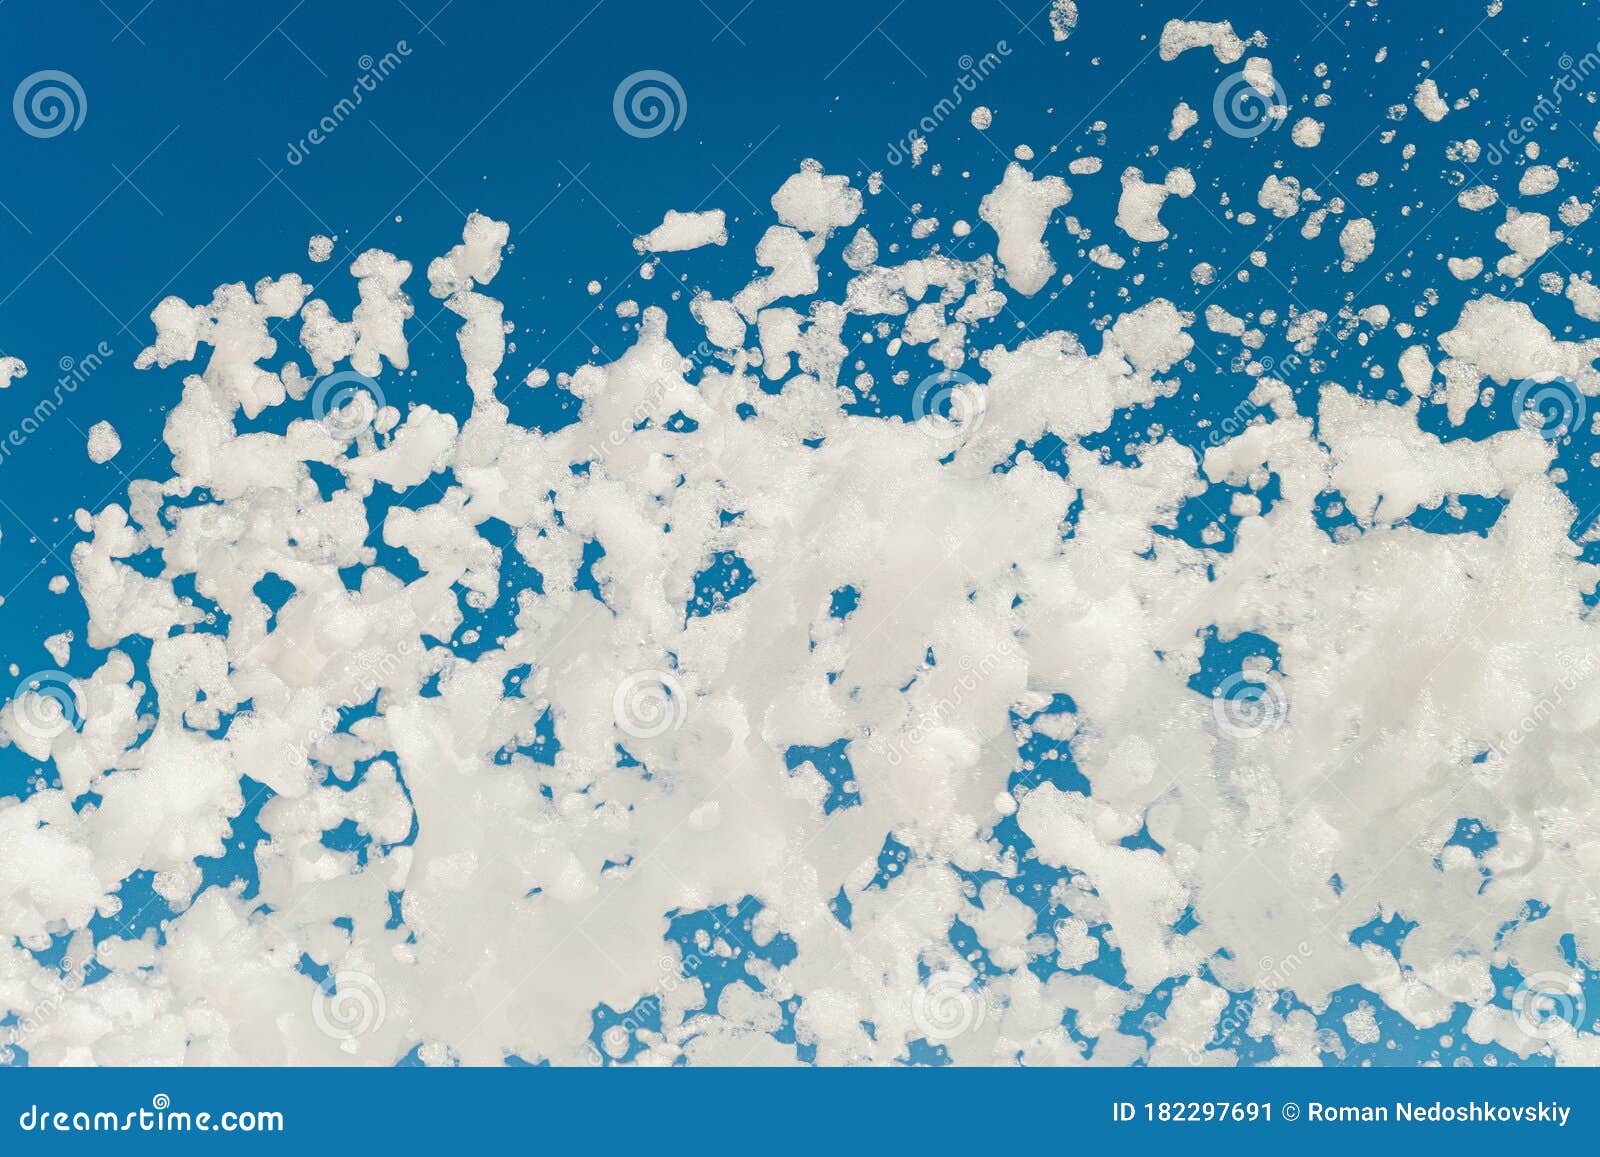 White Airy Foam on a Blue Sky Background Blowing from Lather Maker Gun  Stock Image - Image of amusement, blowed: 182297691